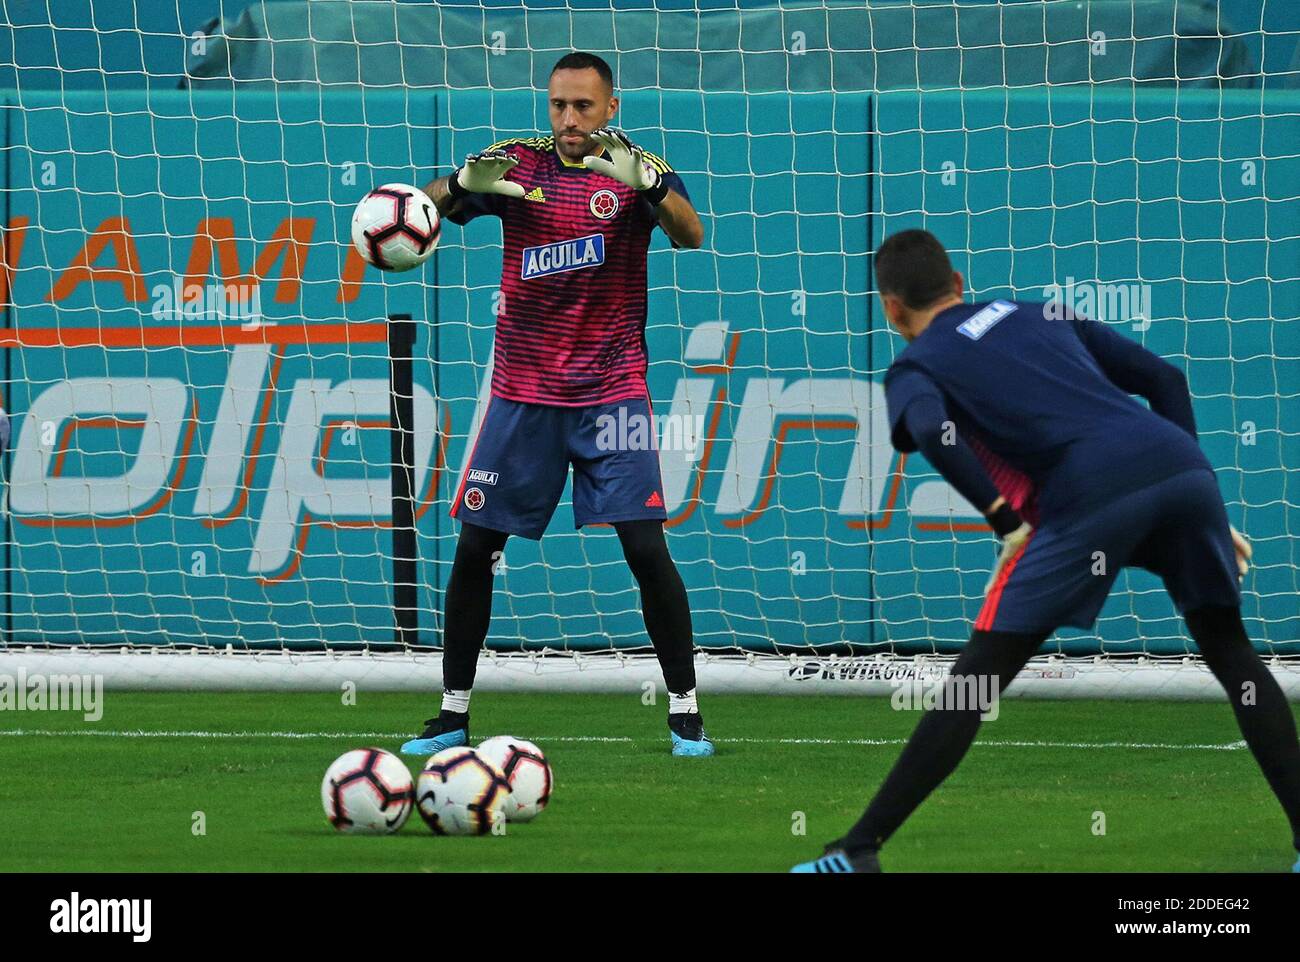 NO FILM, NO VIDEO, NO TV, NO DOCUMENTARY - Colombia national soccer team goalkeeper David Ospina during practice on Thursday, September 5, 2019, at Hard Rock Stadium in Miami Gardens, FL, USA, in preparation for international friendly match set on Friday night against Brazil. Photo by David Santiago/Miami Herald/TNS/ABACAPRESS.COM Stock Photo